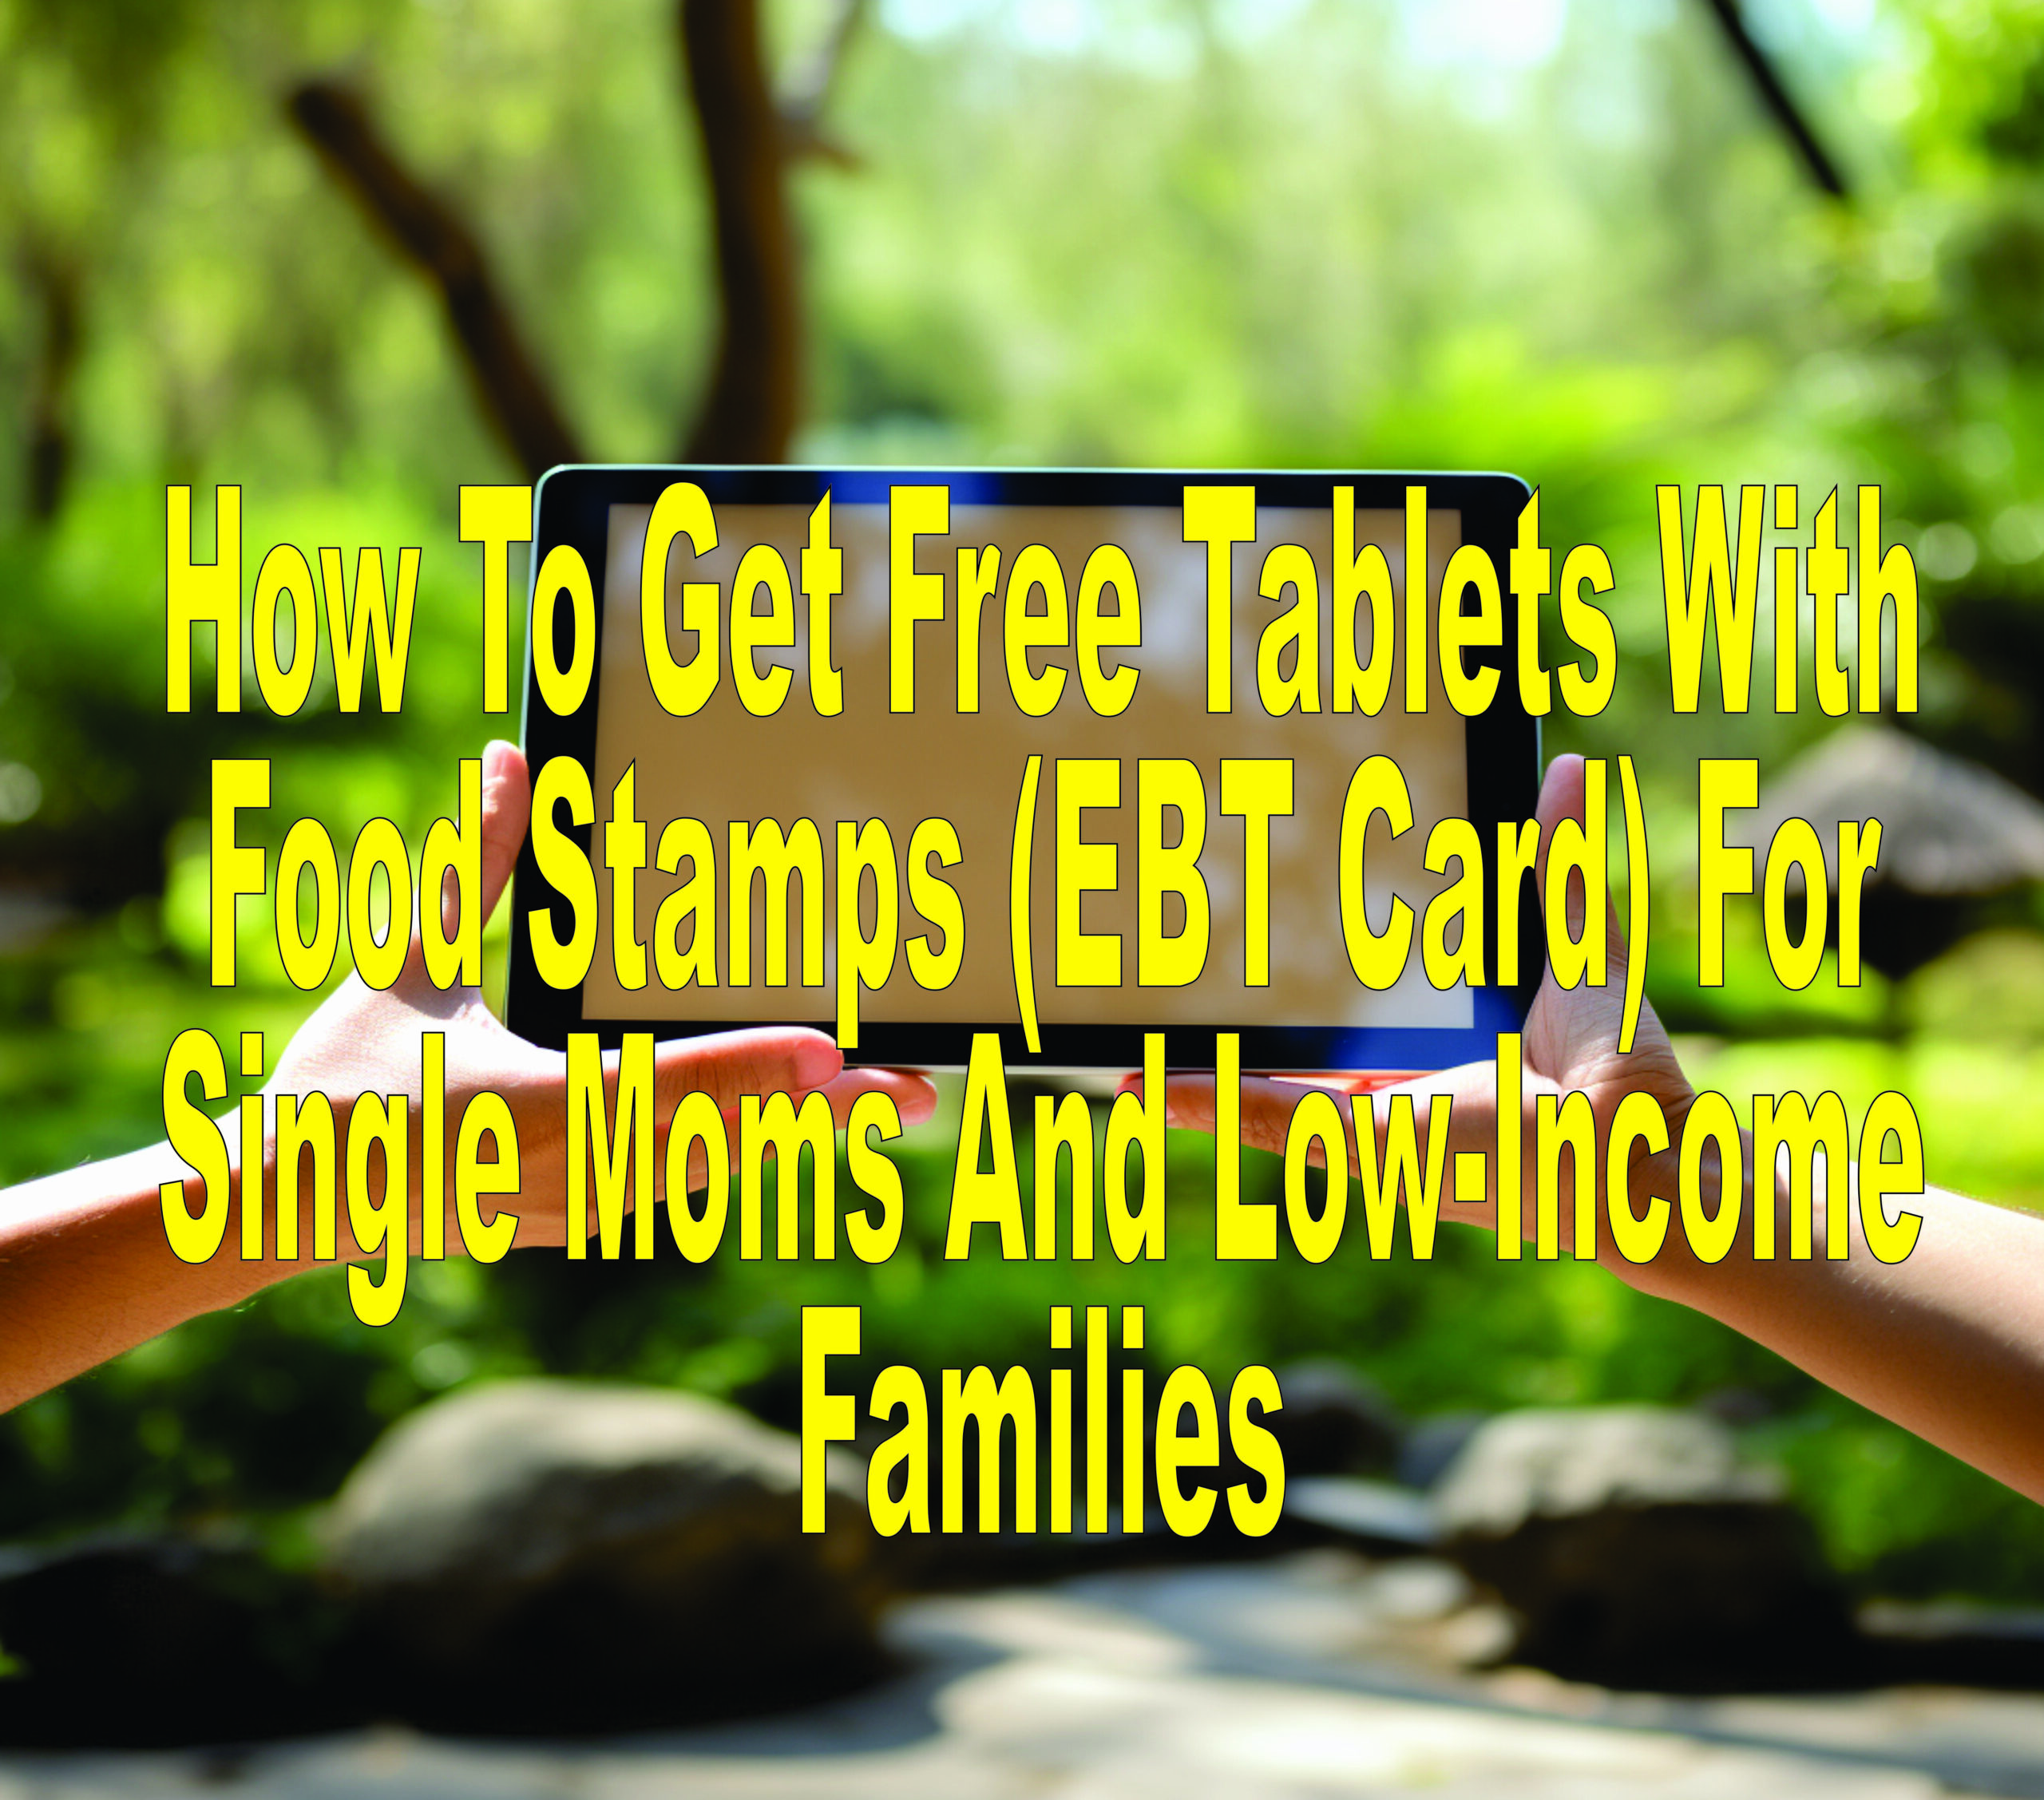 How To Get Free Tablets With Food Stamps (ebt Card) For Single Moms And Low Income Families